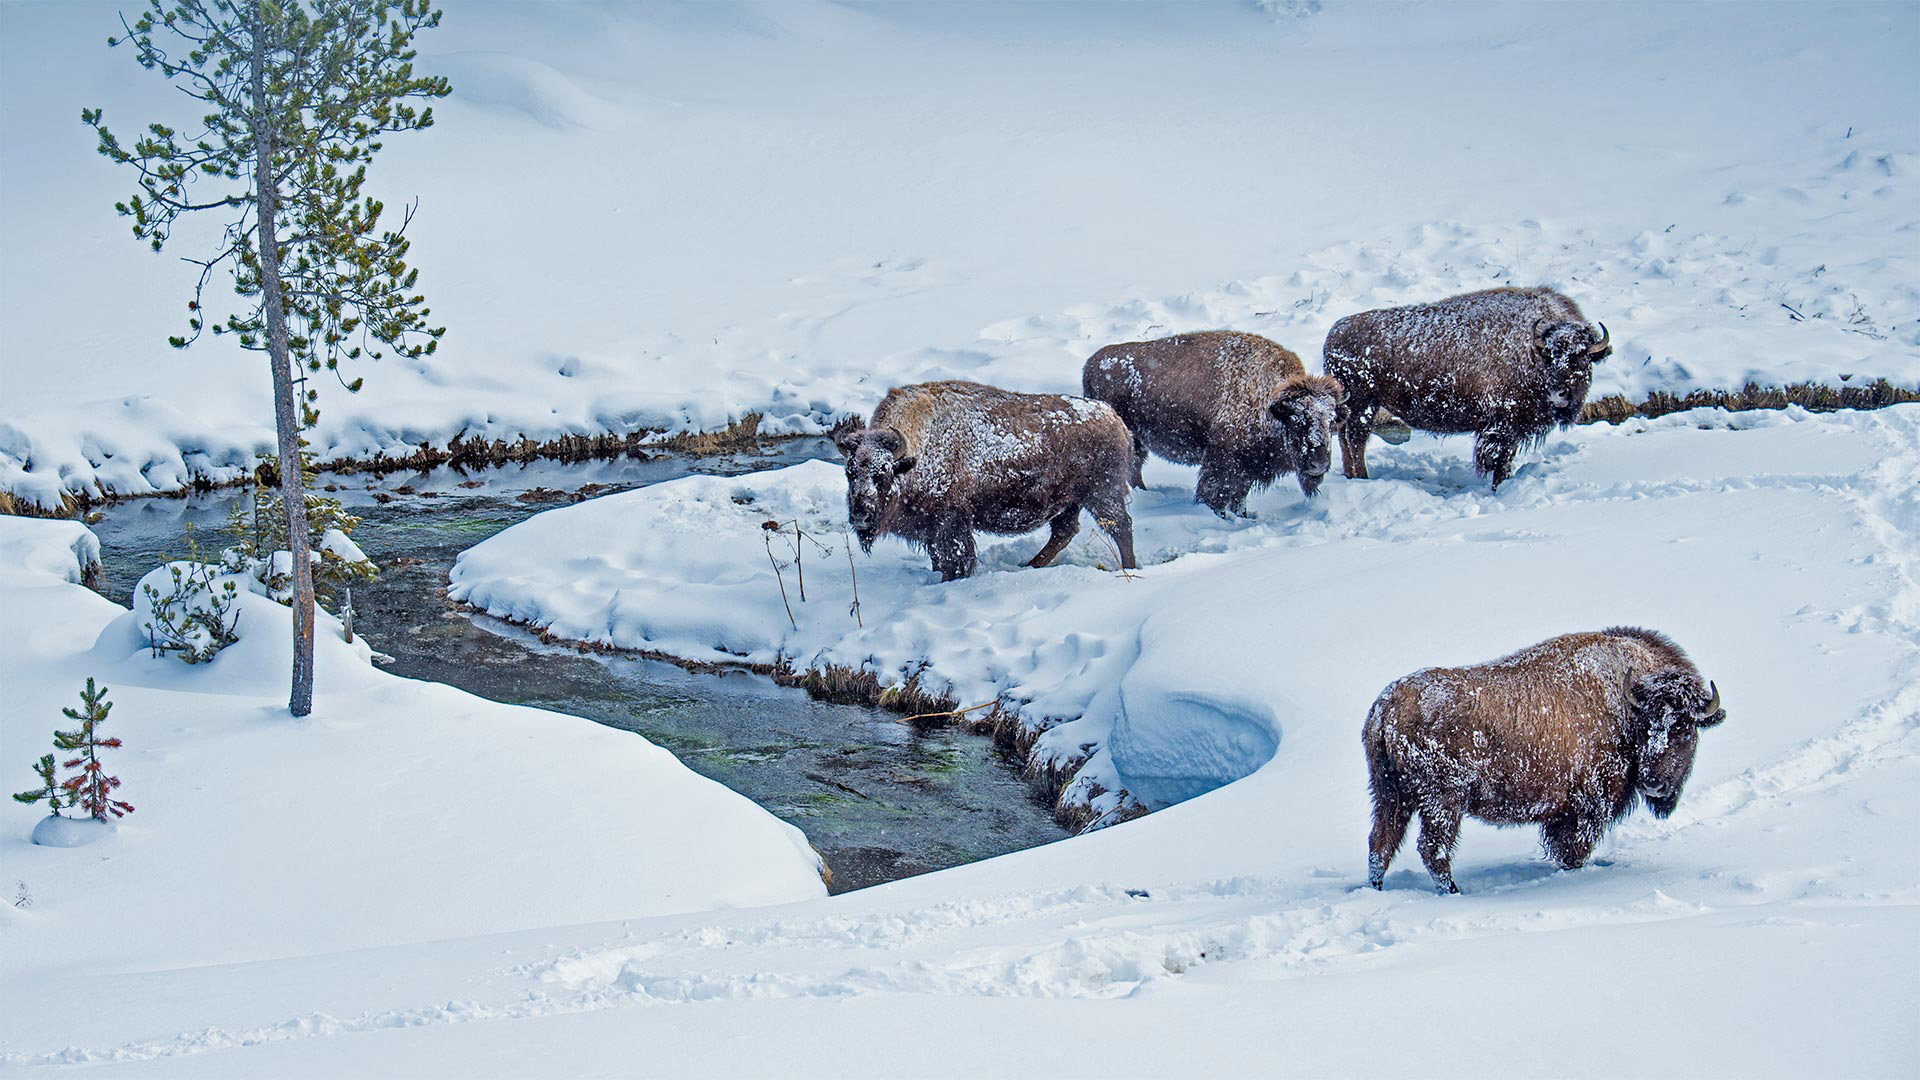 American bison in Yellowstone National Park, Wyoming - Steve Gettle